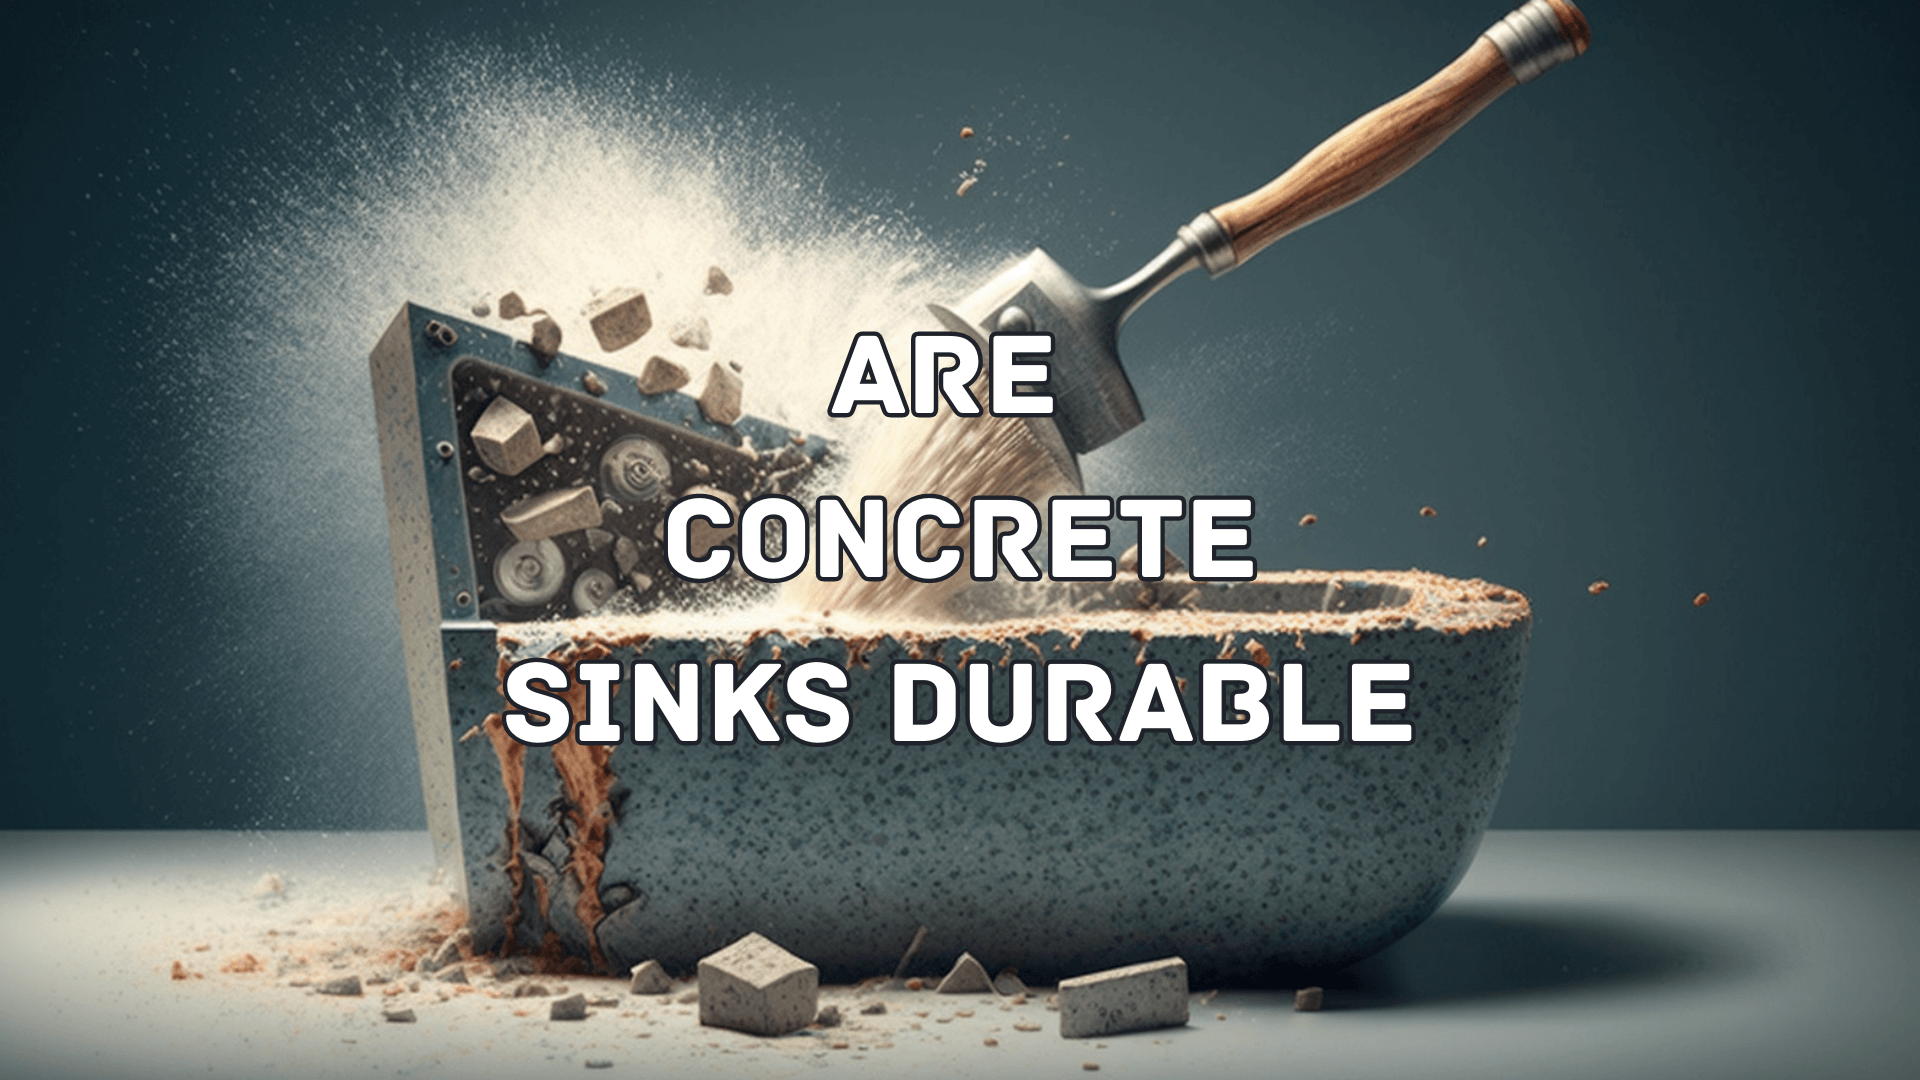 Are Concrete Sinks Durable?